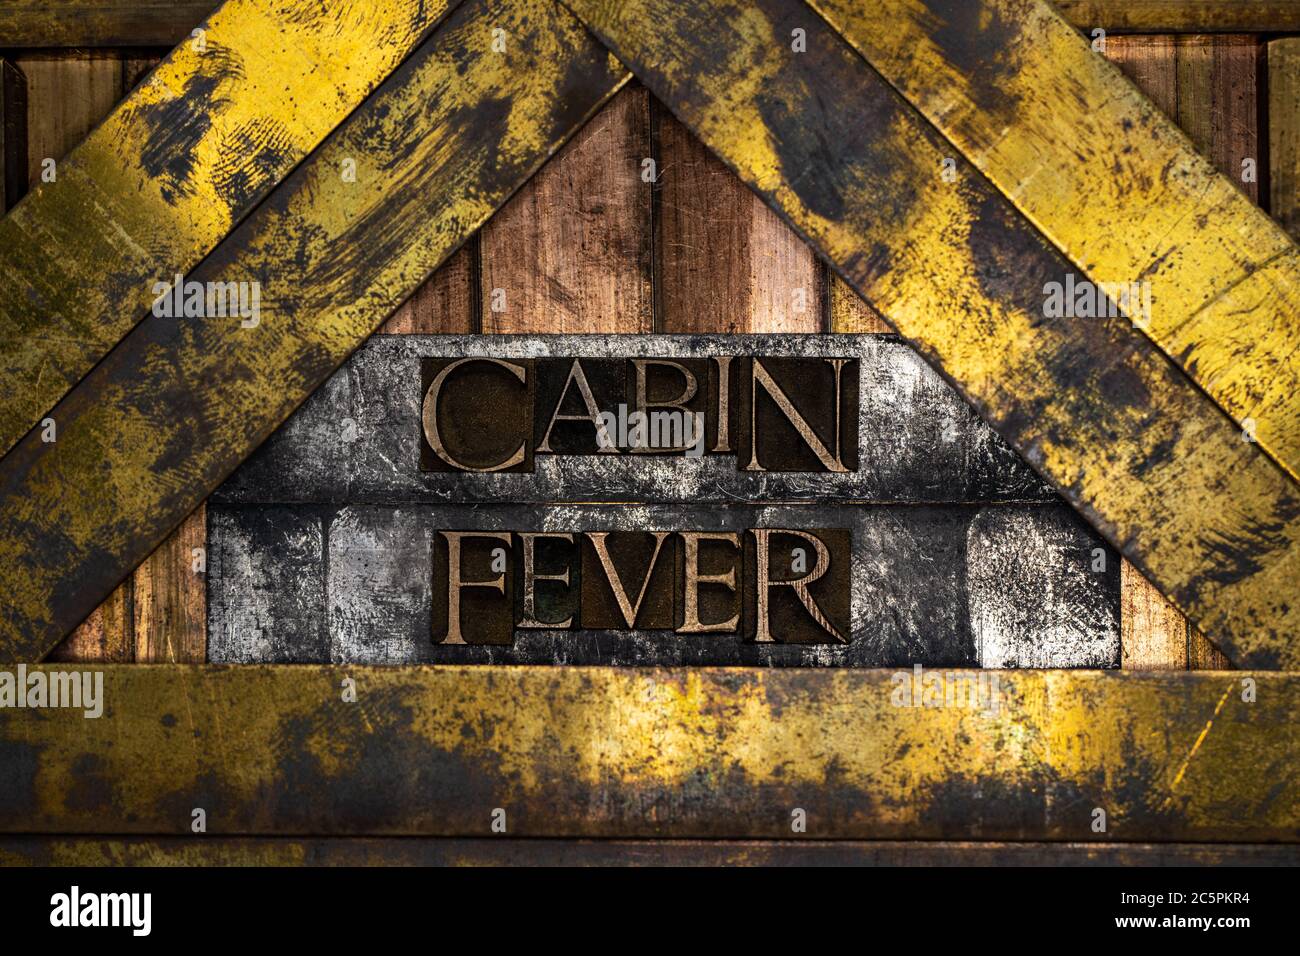 Cabin Fever text formed with real authentic typeset letters on vintage textured silver grunge copper and gold background Stock Photo